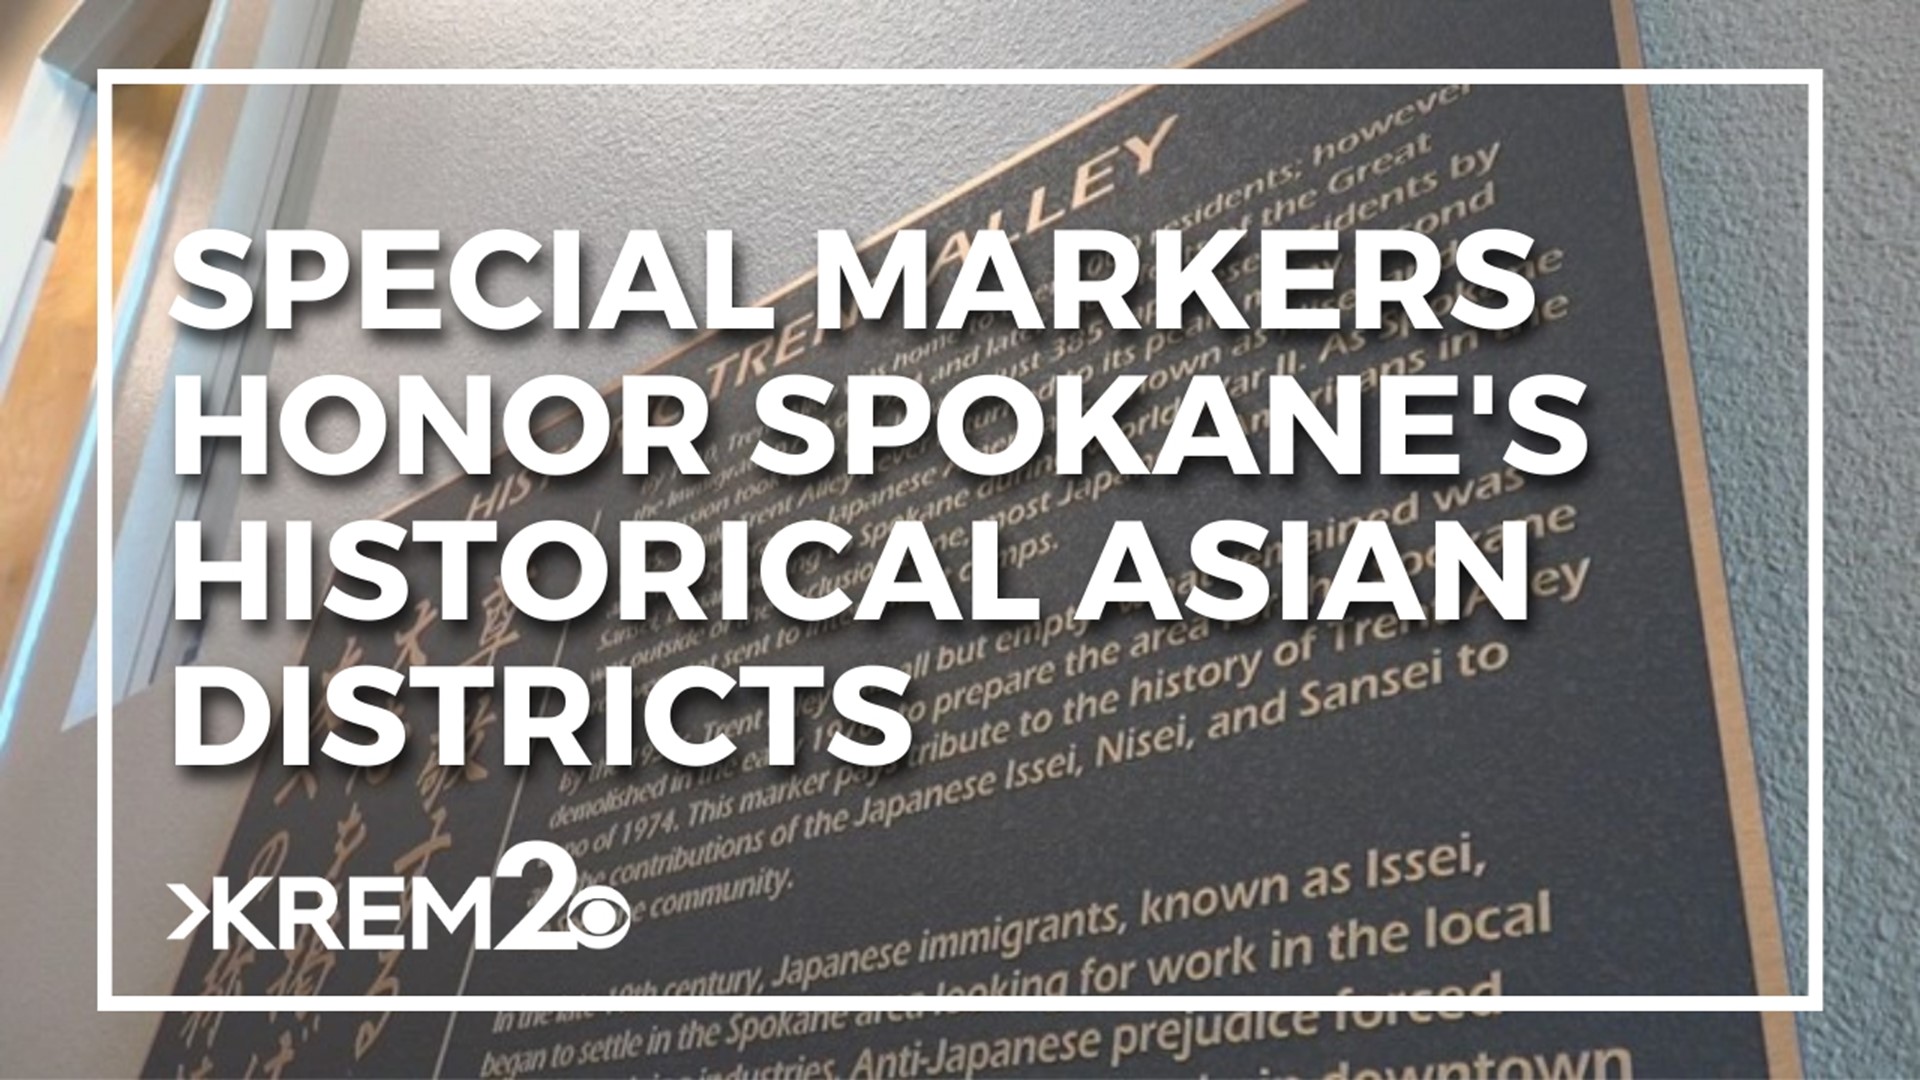 This weekend, the Asian-American community will dedicate markers to remember Spokane’s Chinatown as well as Trent Alley.